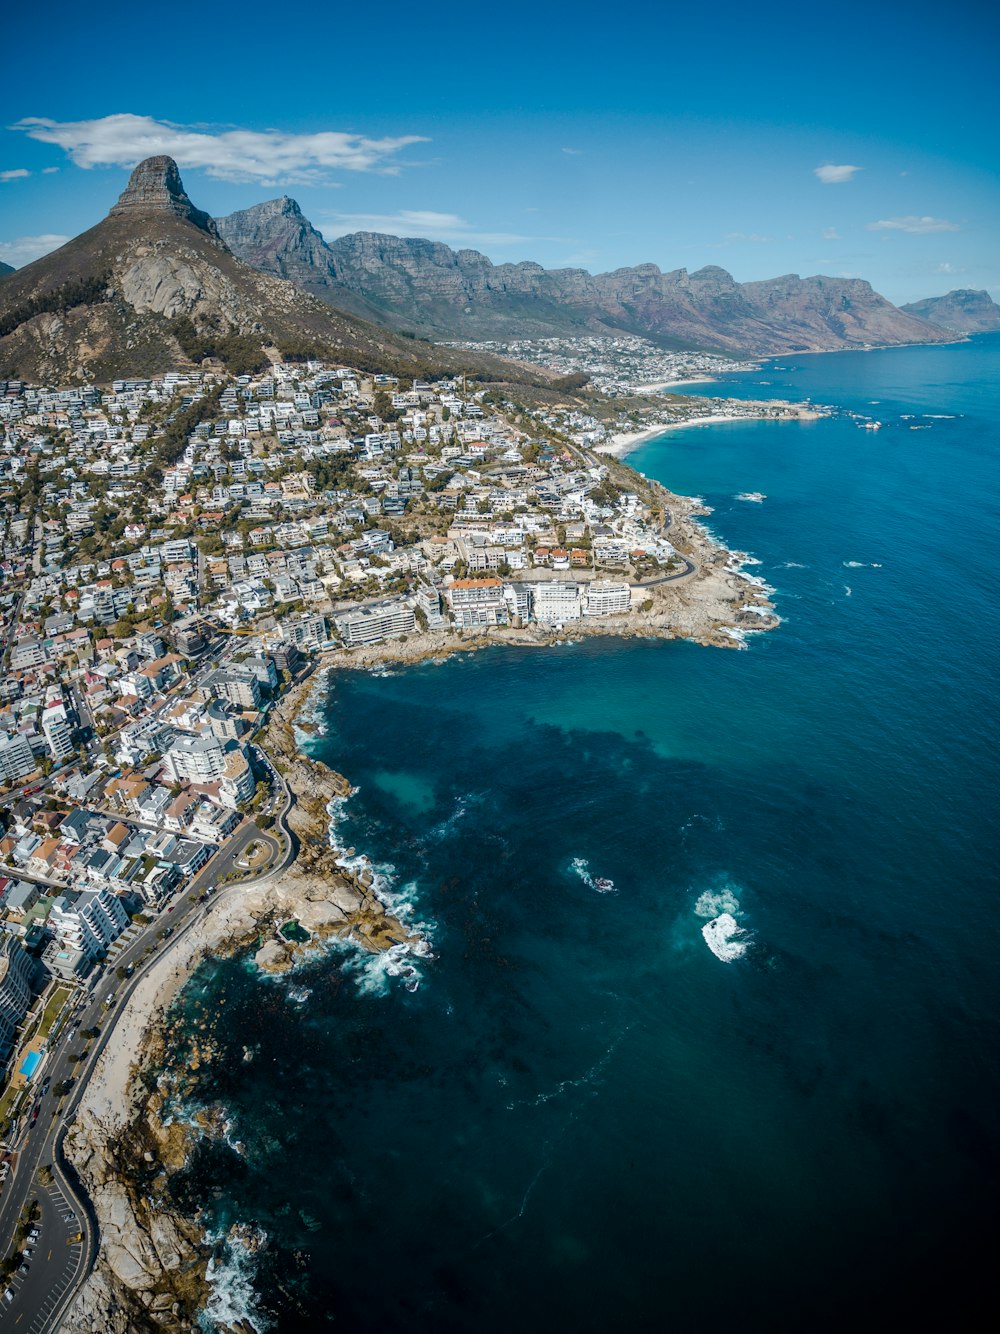 27+ South Africa Pictures [Scenic Travel Photos] | Download Free Images